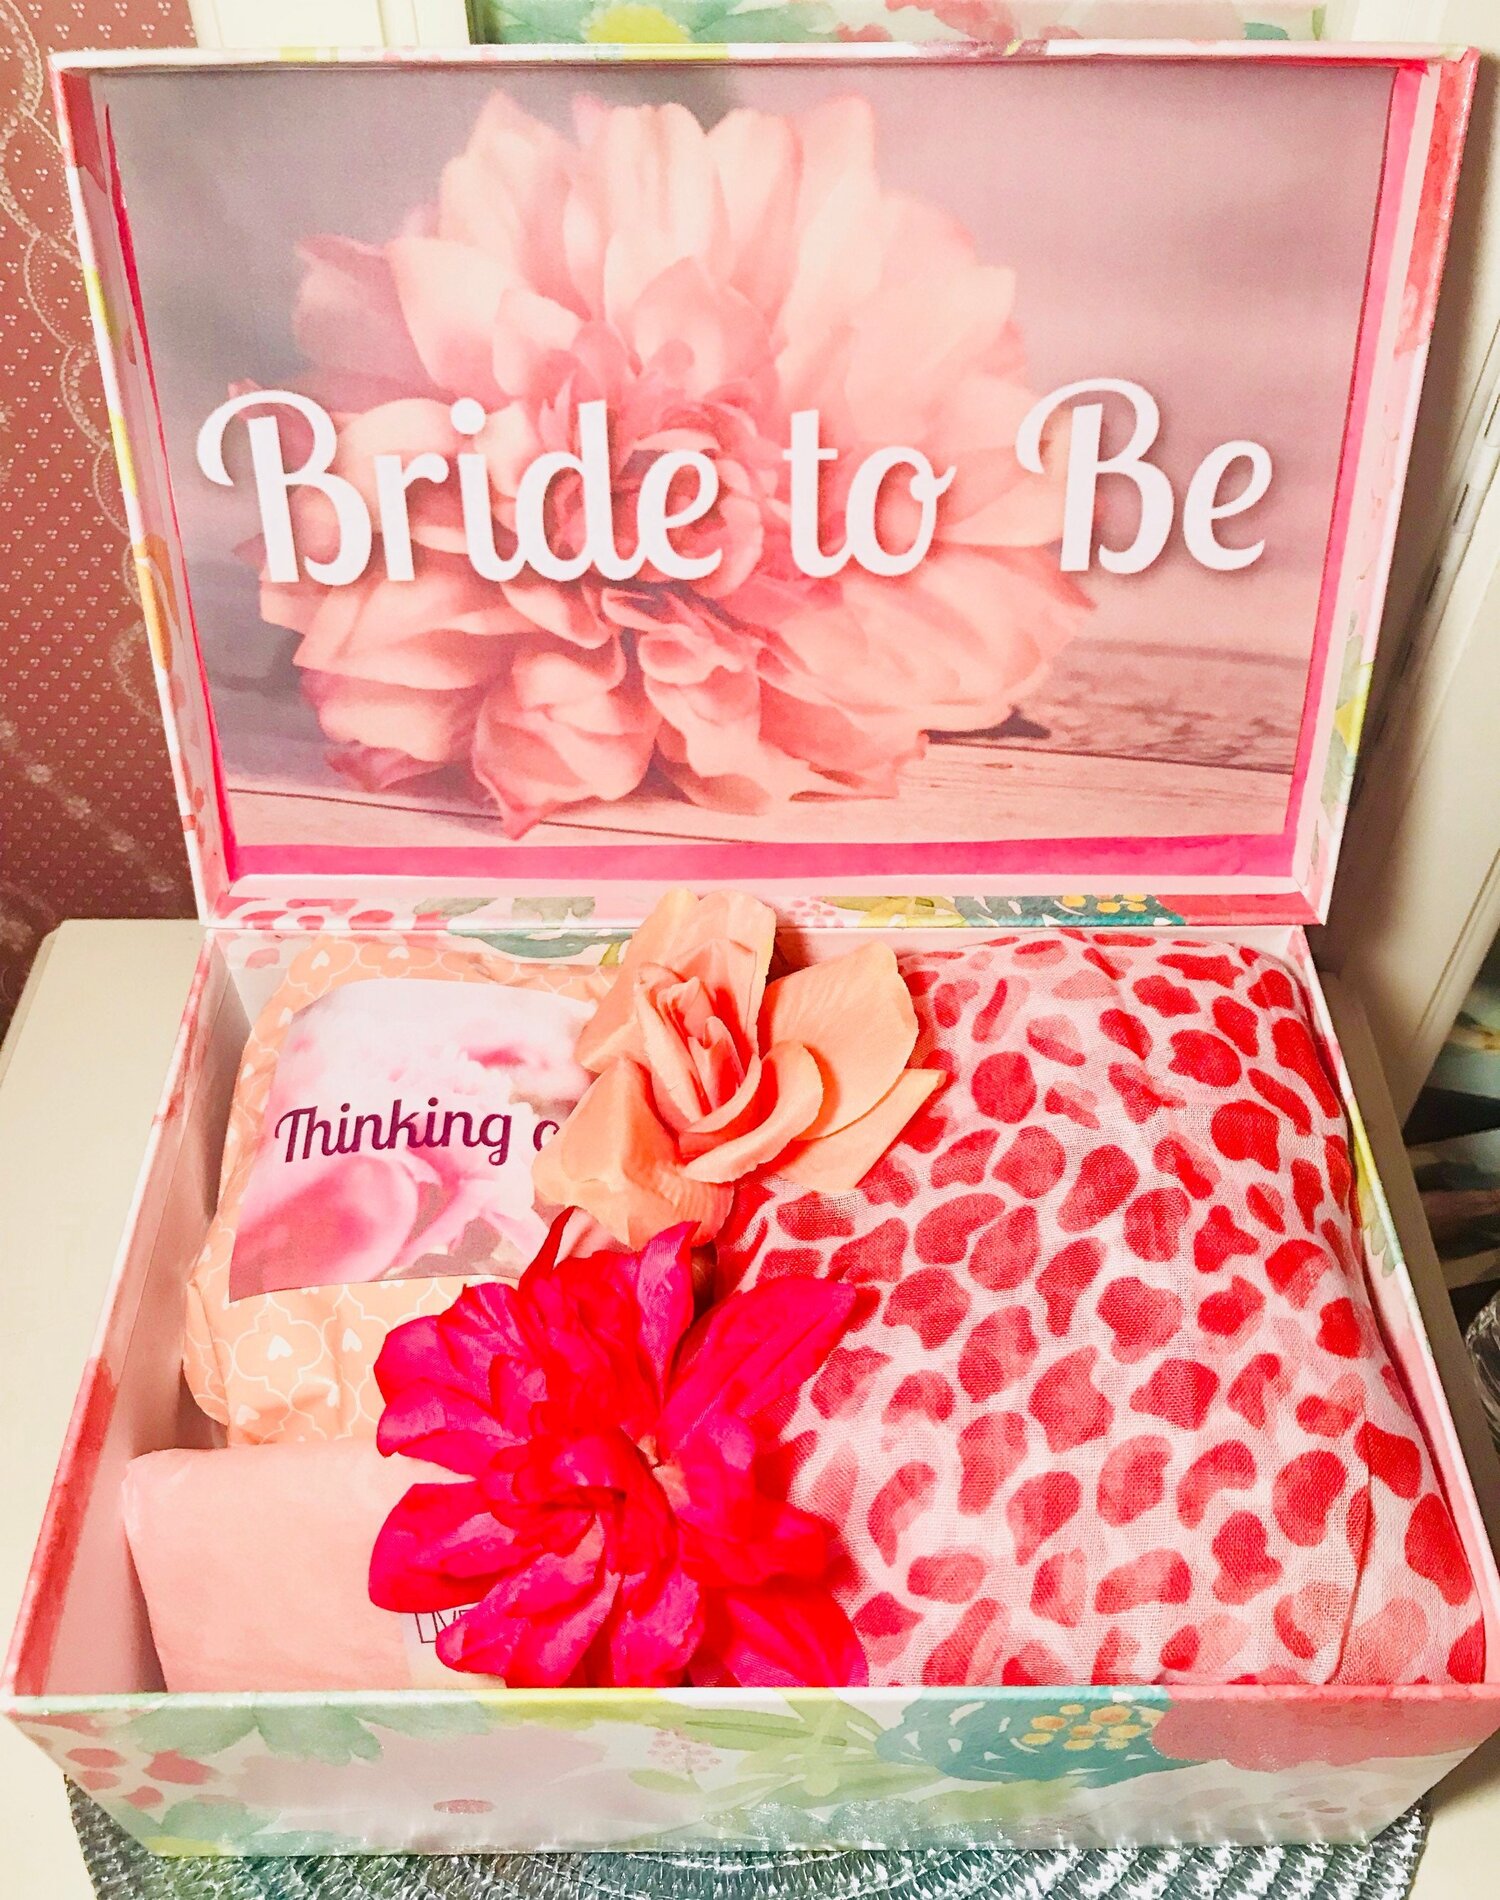 Bride to Be YouAreBeautifulBox, Bride Care Package, Bride Gift Box, Groom  to Bride Gift, Bride Gift from Bridesmaids